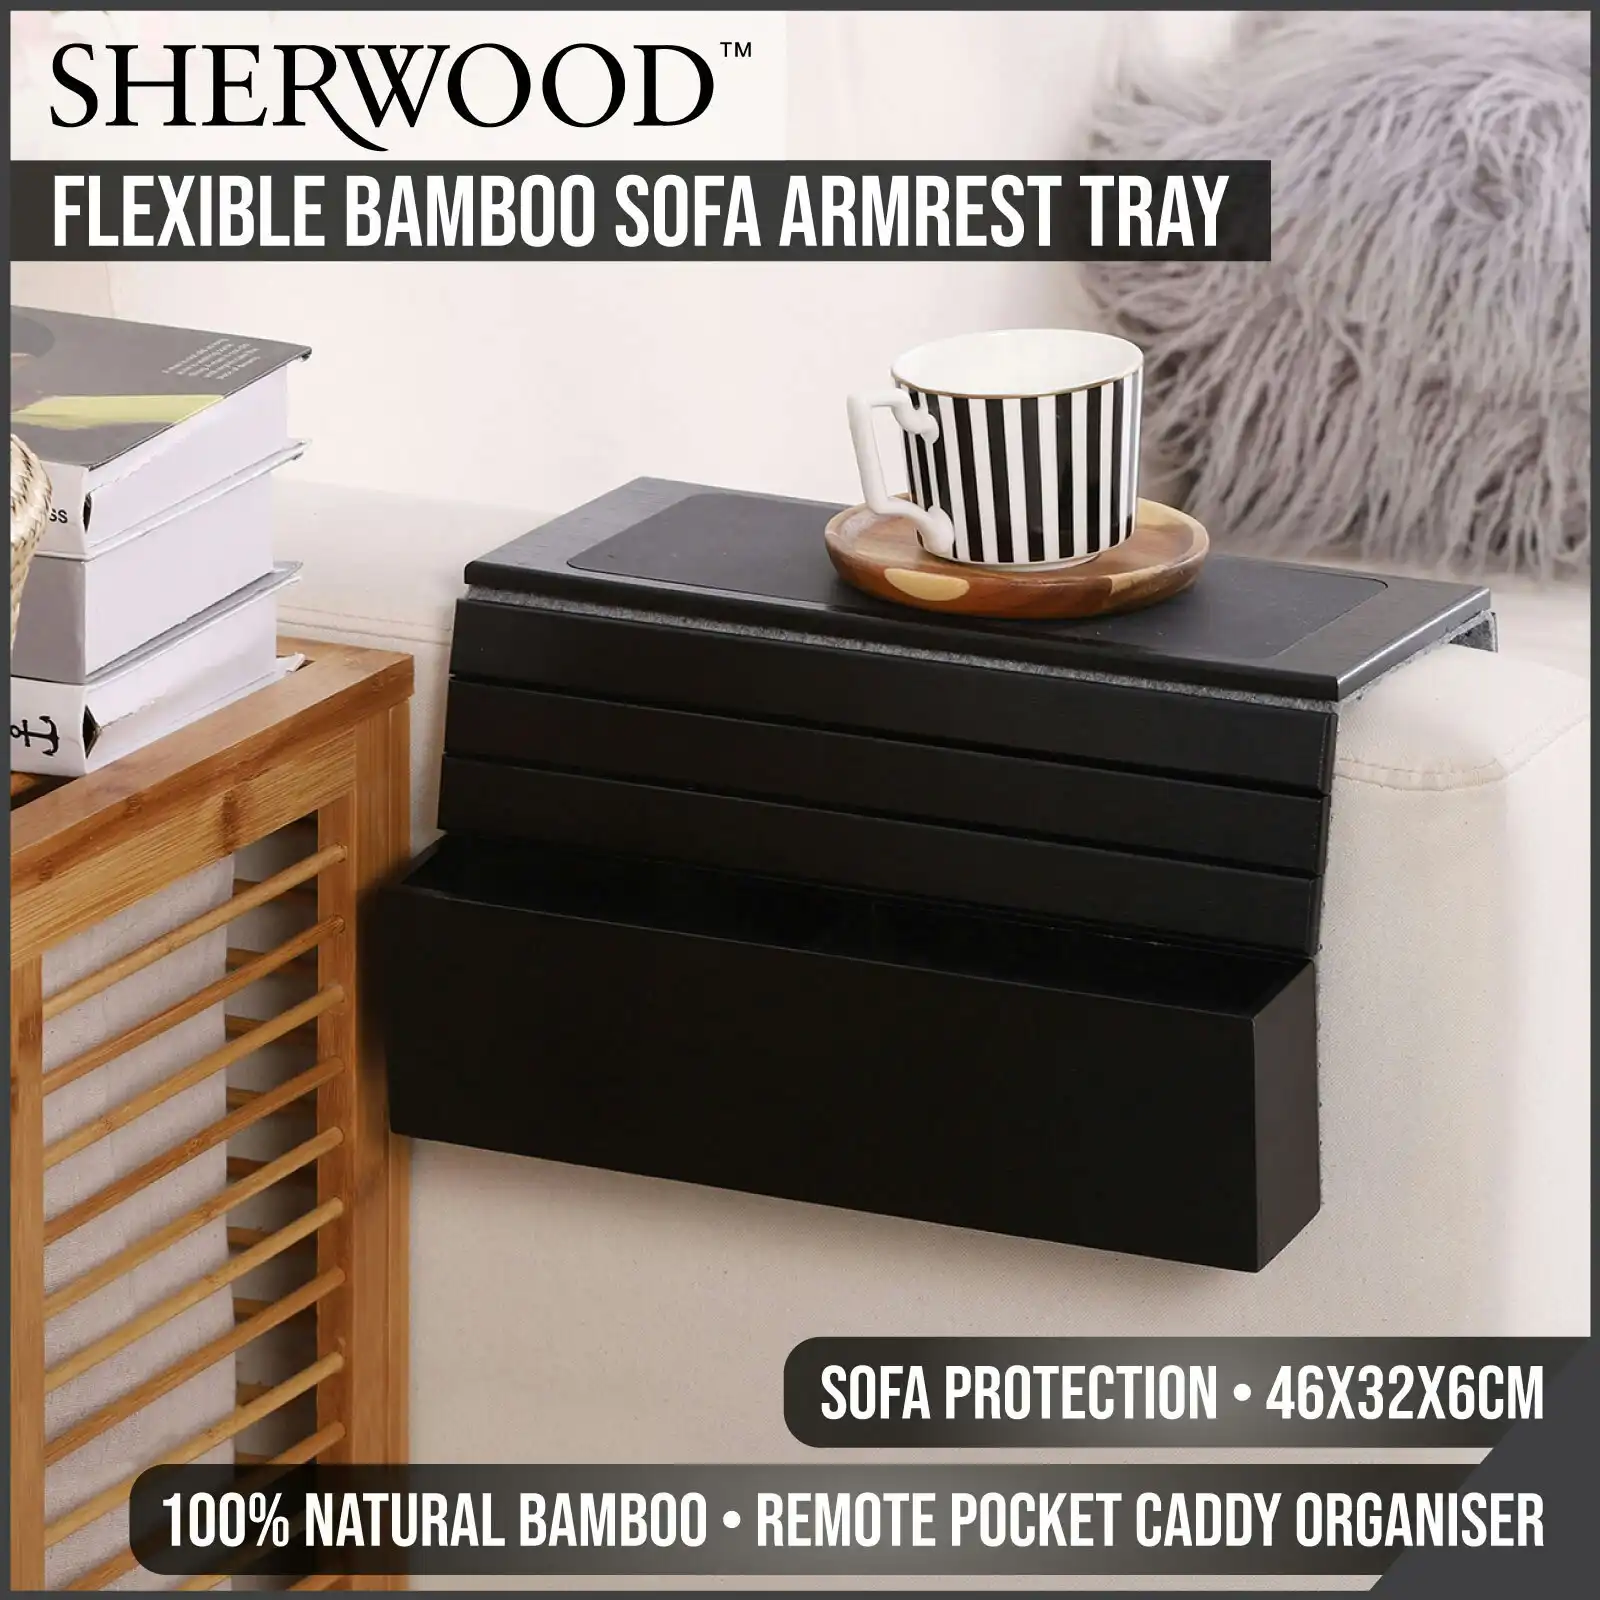 Sherwood Home Flexible Bamboo Sofa Armrest Tray with Remote Pocket Caddy Organiser 46x32x6cm